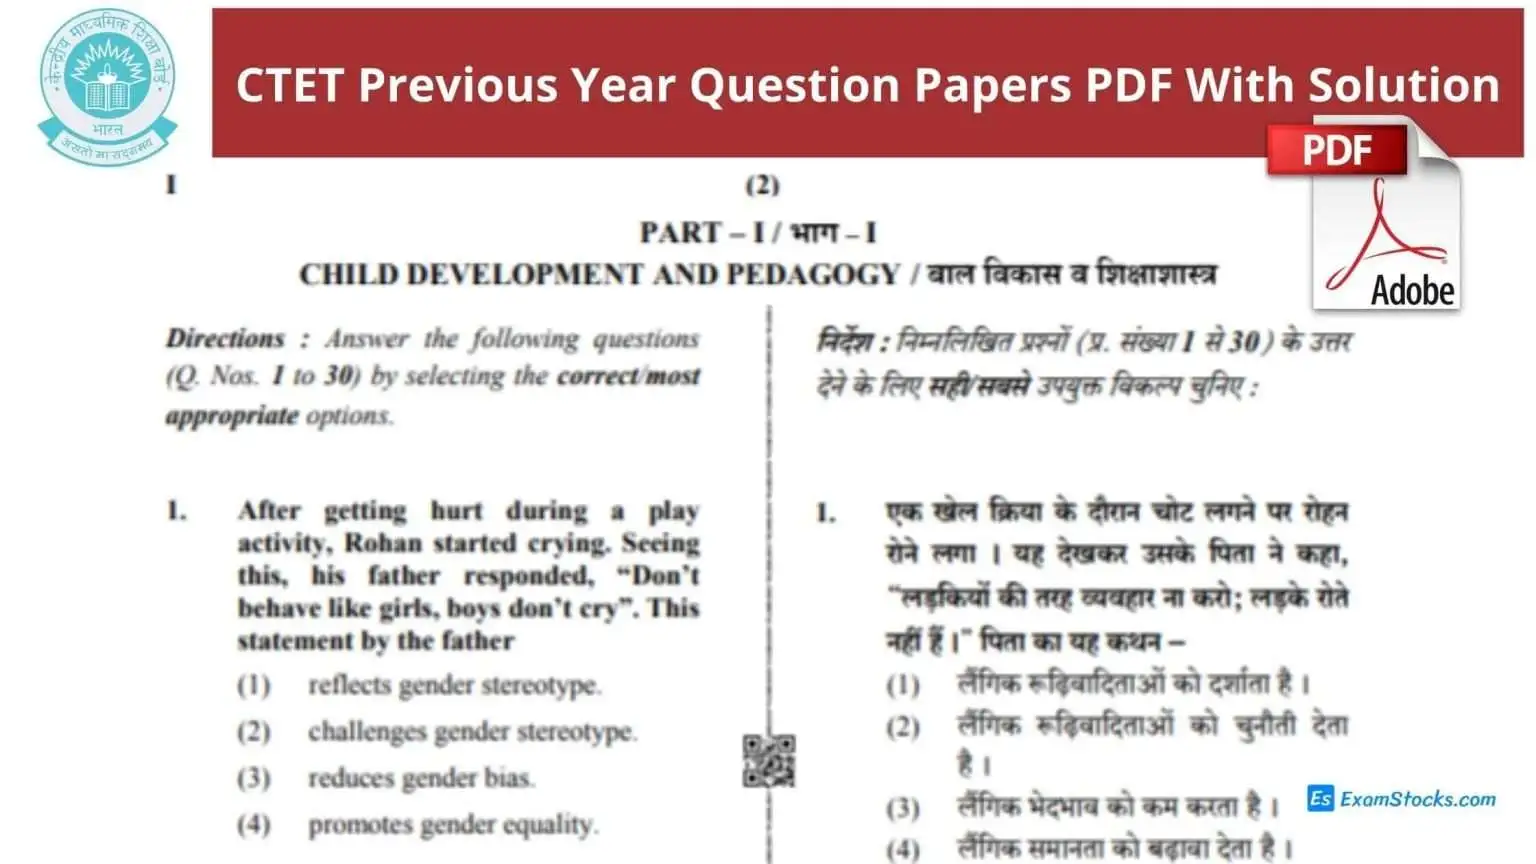 CTET Previous Year Question Papers PDF